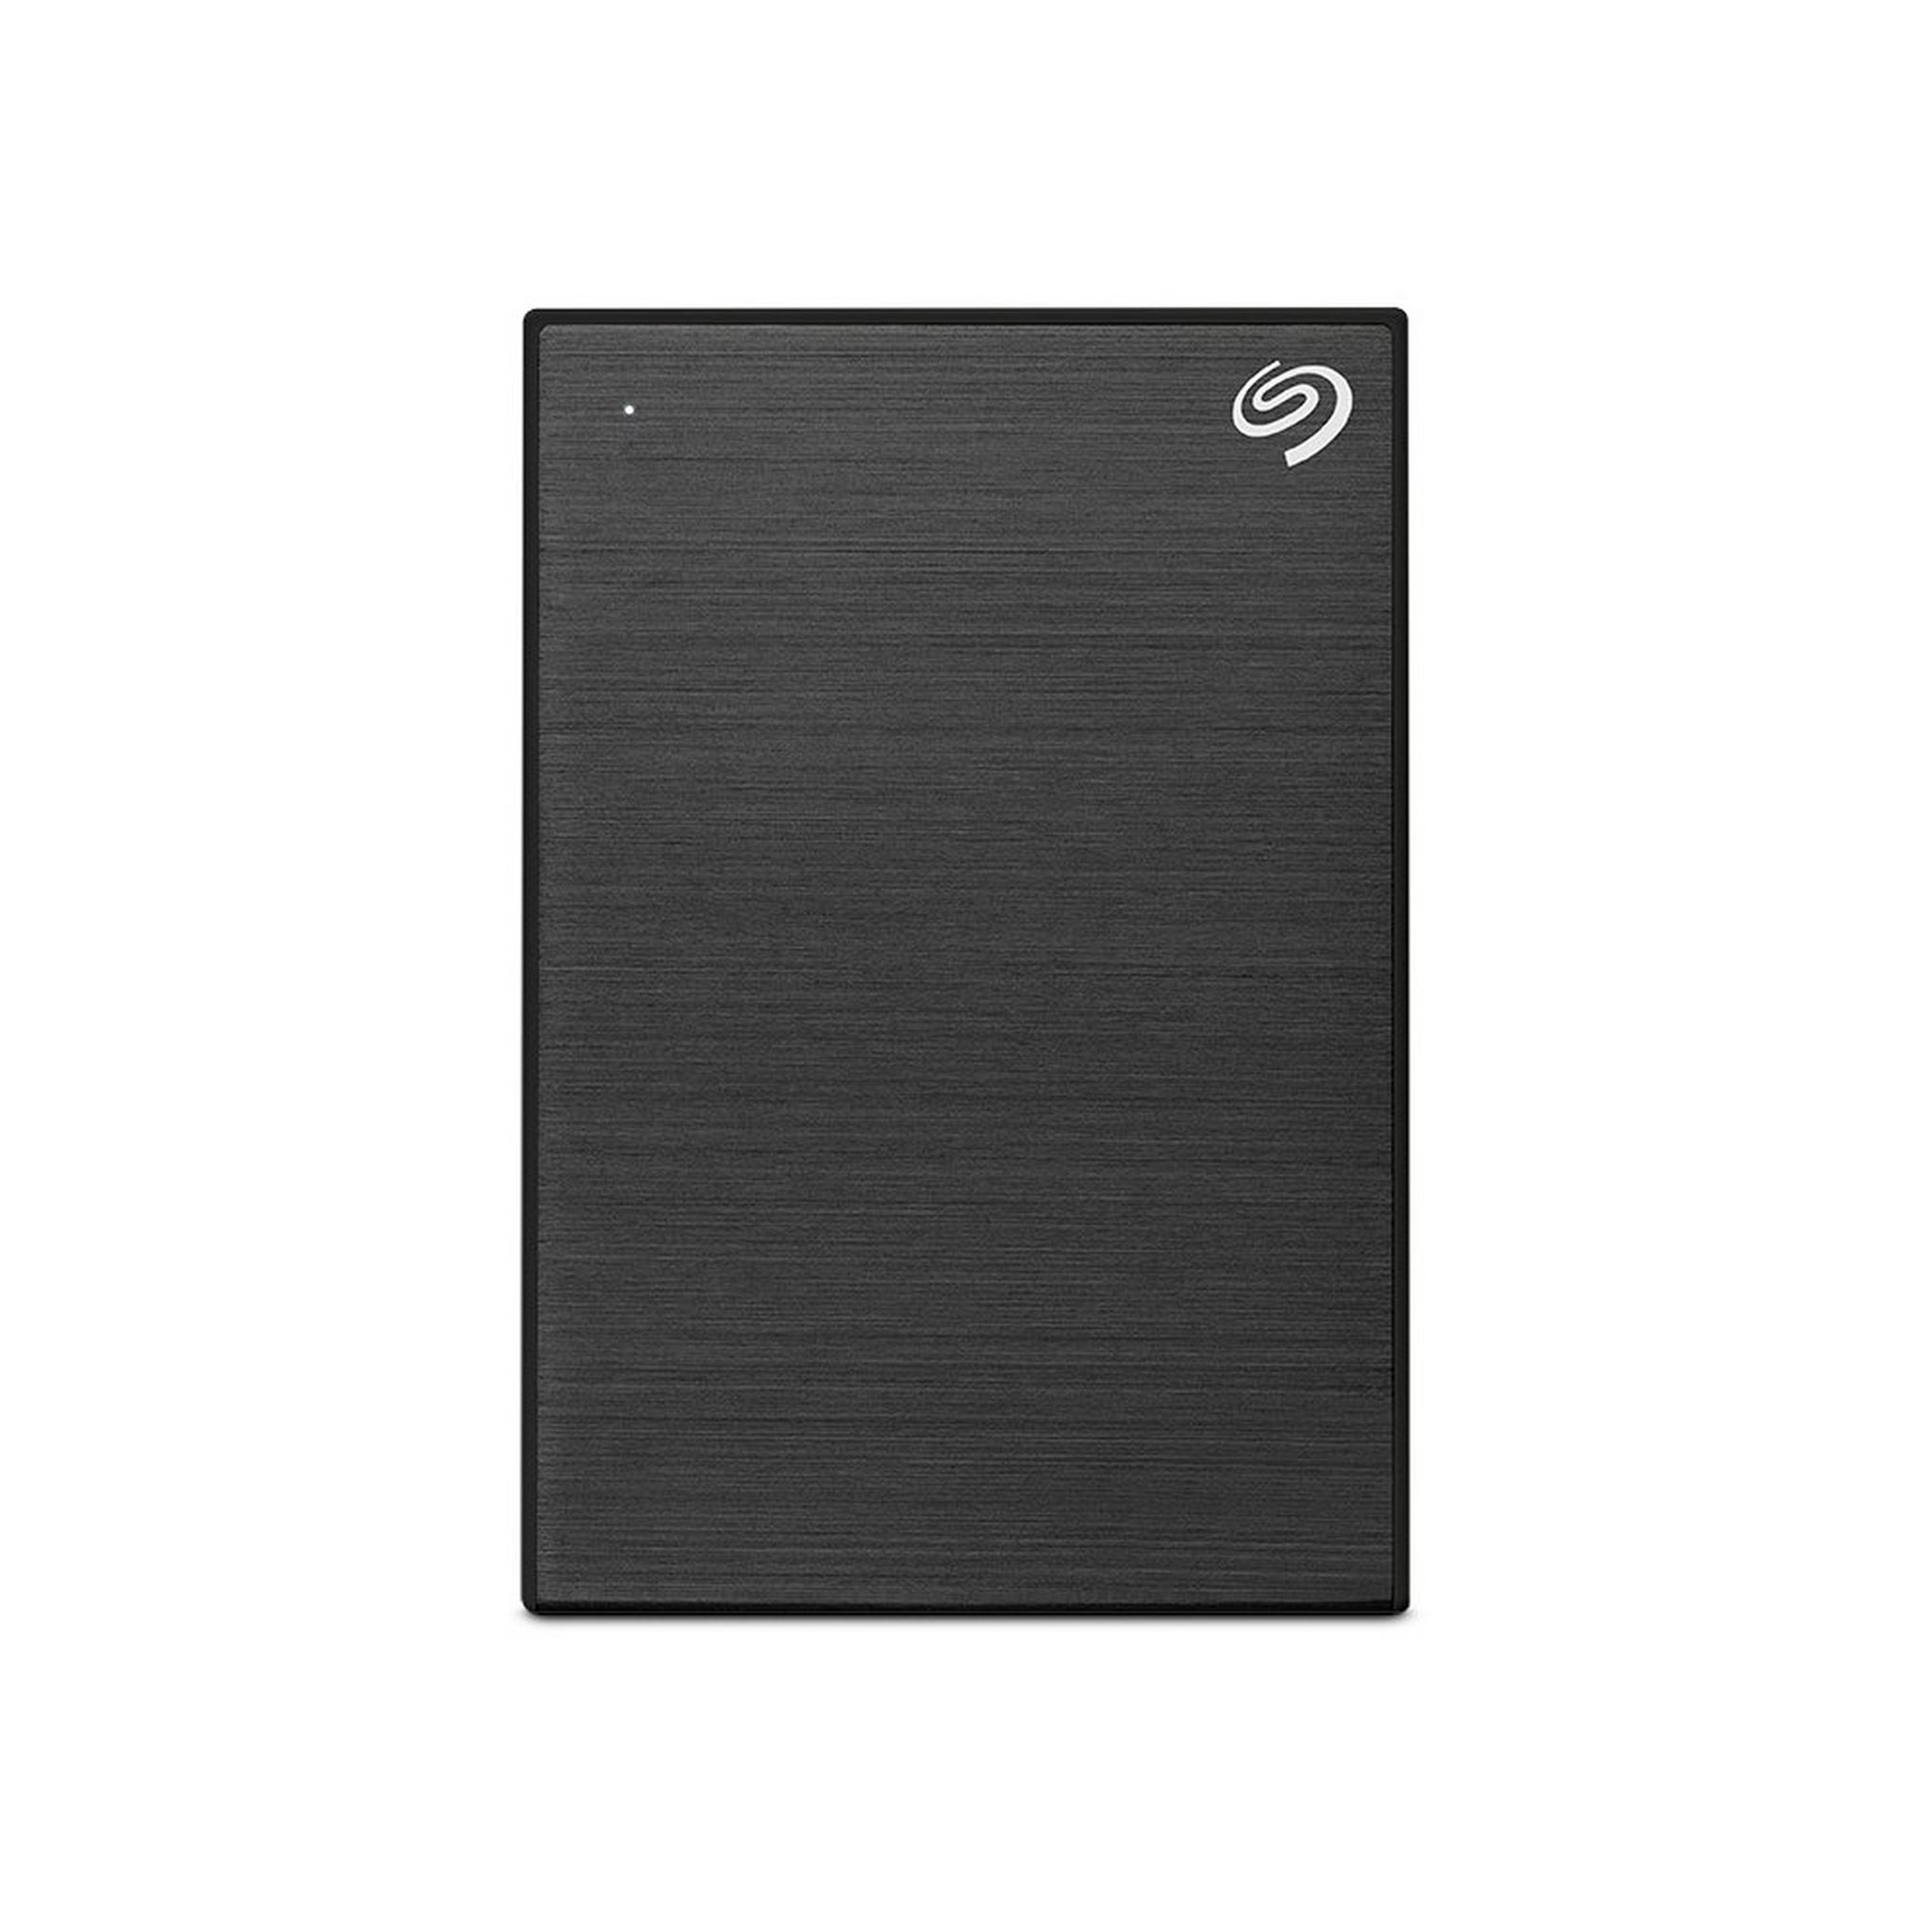 SEAGATE One Touch Portable Hard drive, 2TB HDD with Password, STKY2000400- Black